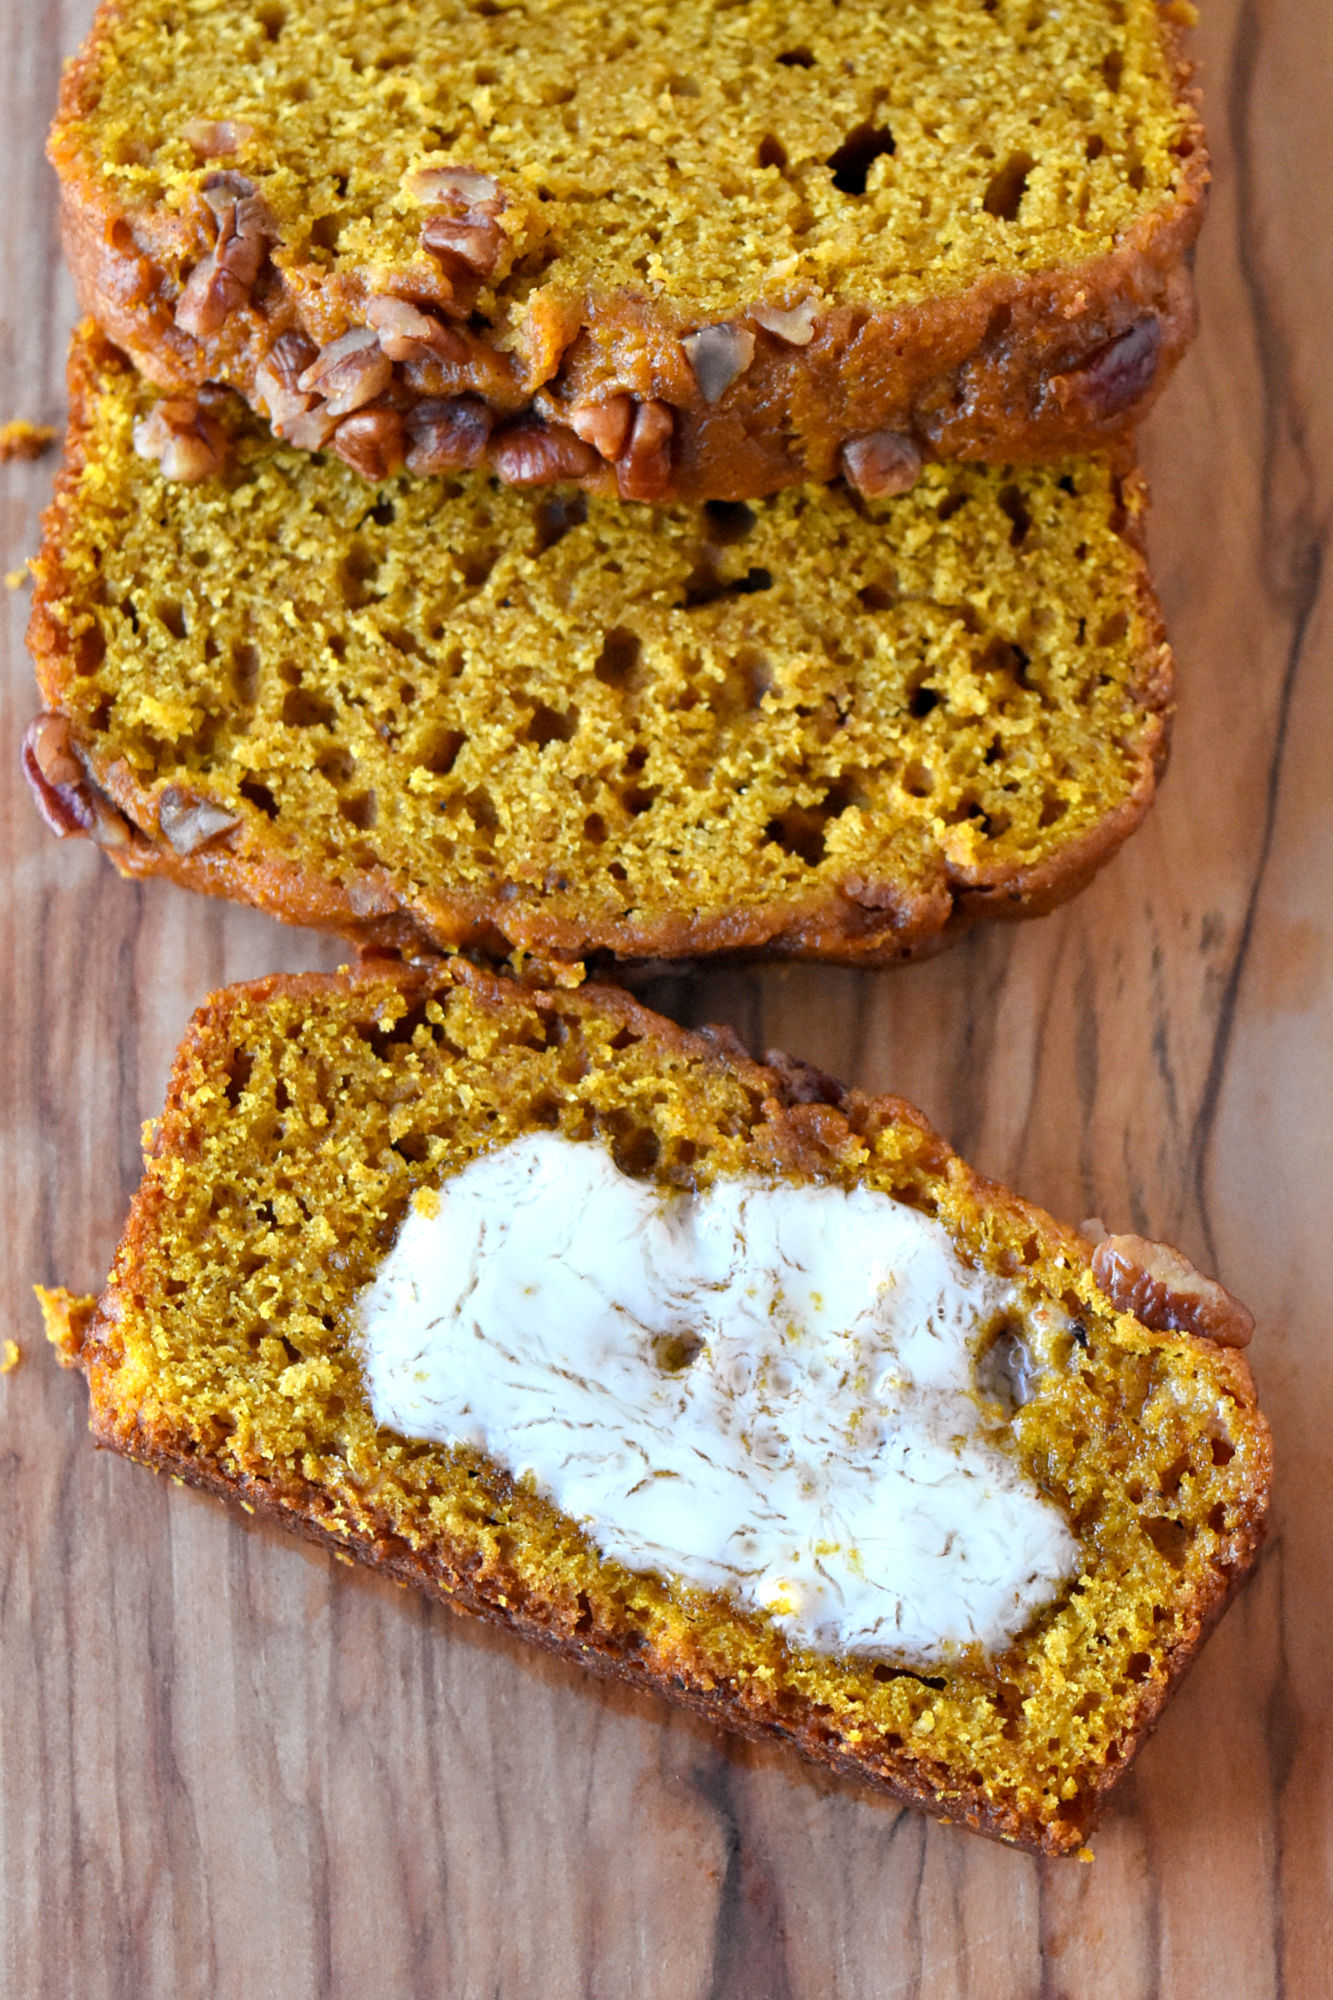 Get ready to elevate your pumpkin bread game and become the go-to pumpkin bread expert among your friends! This Easy Pumpkin Bread is moist, delicious, and packed with fall flavors! #PumpkinWeek #PumpkinBread #AutumnBakes #FallBaking #YummyPumpkin #SeasonalDesserts #PumpkinLove #DeliciousBread
